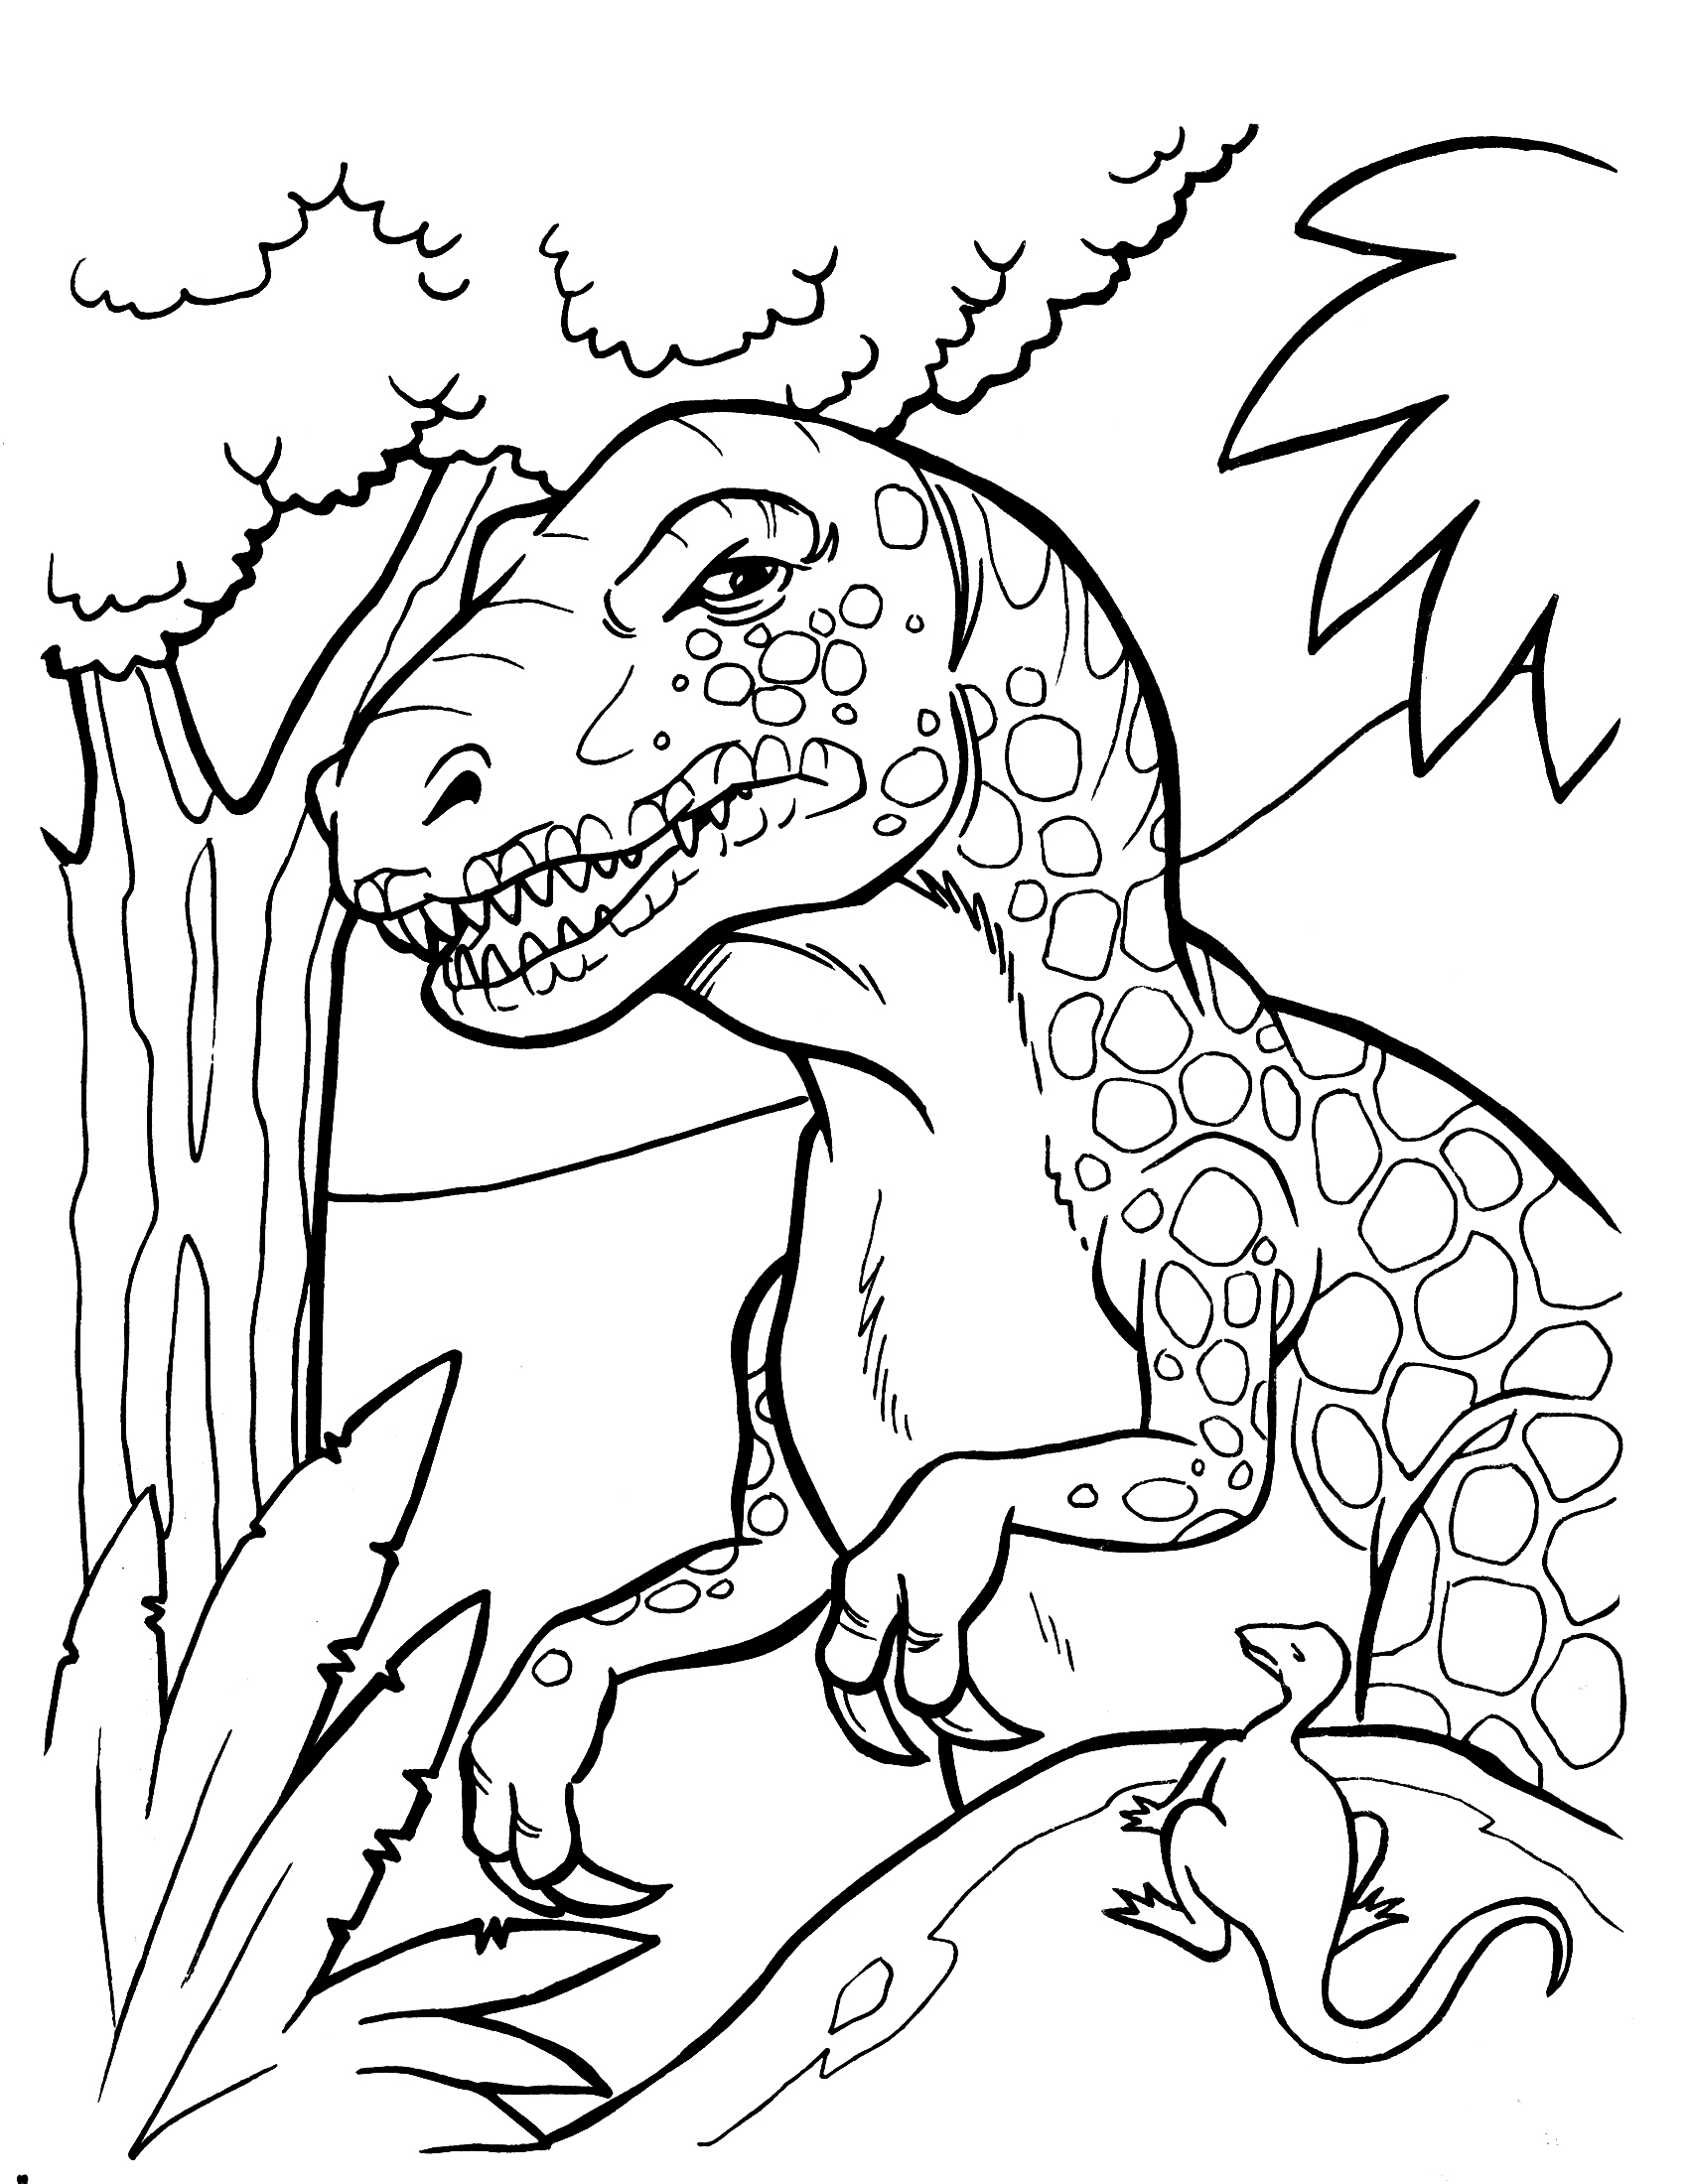 Dinosaurs Coloring Pages T Rex at GetColorings.com | Free printable